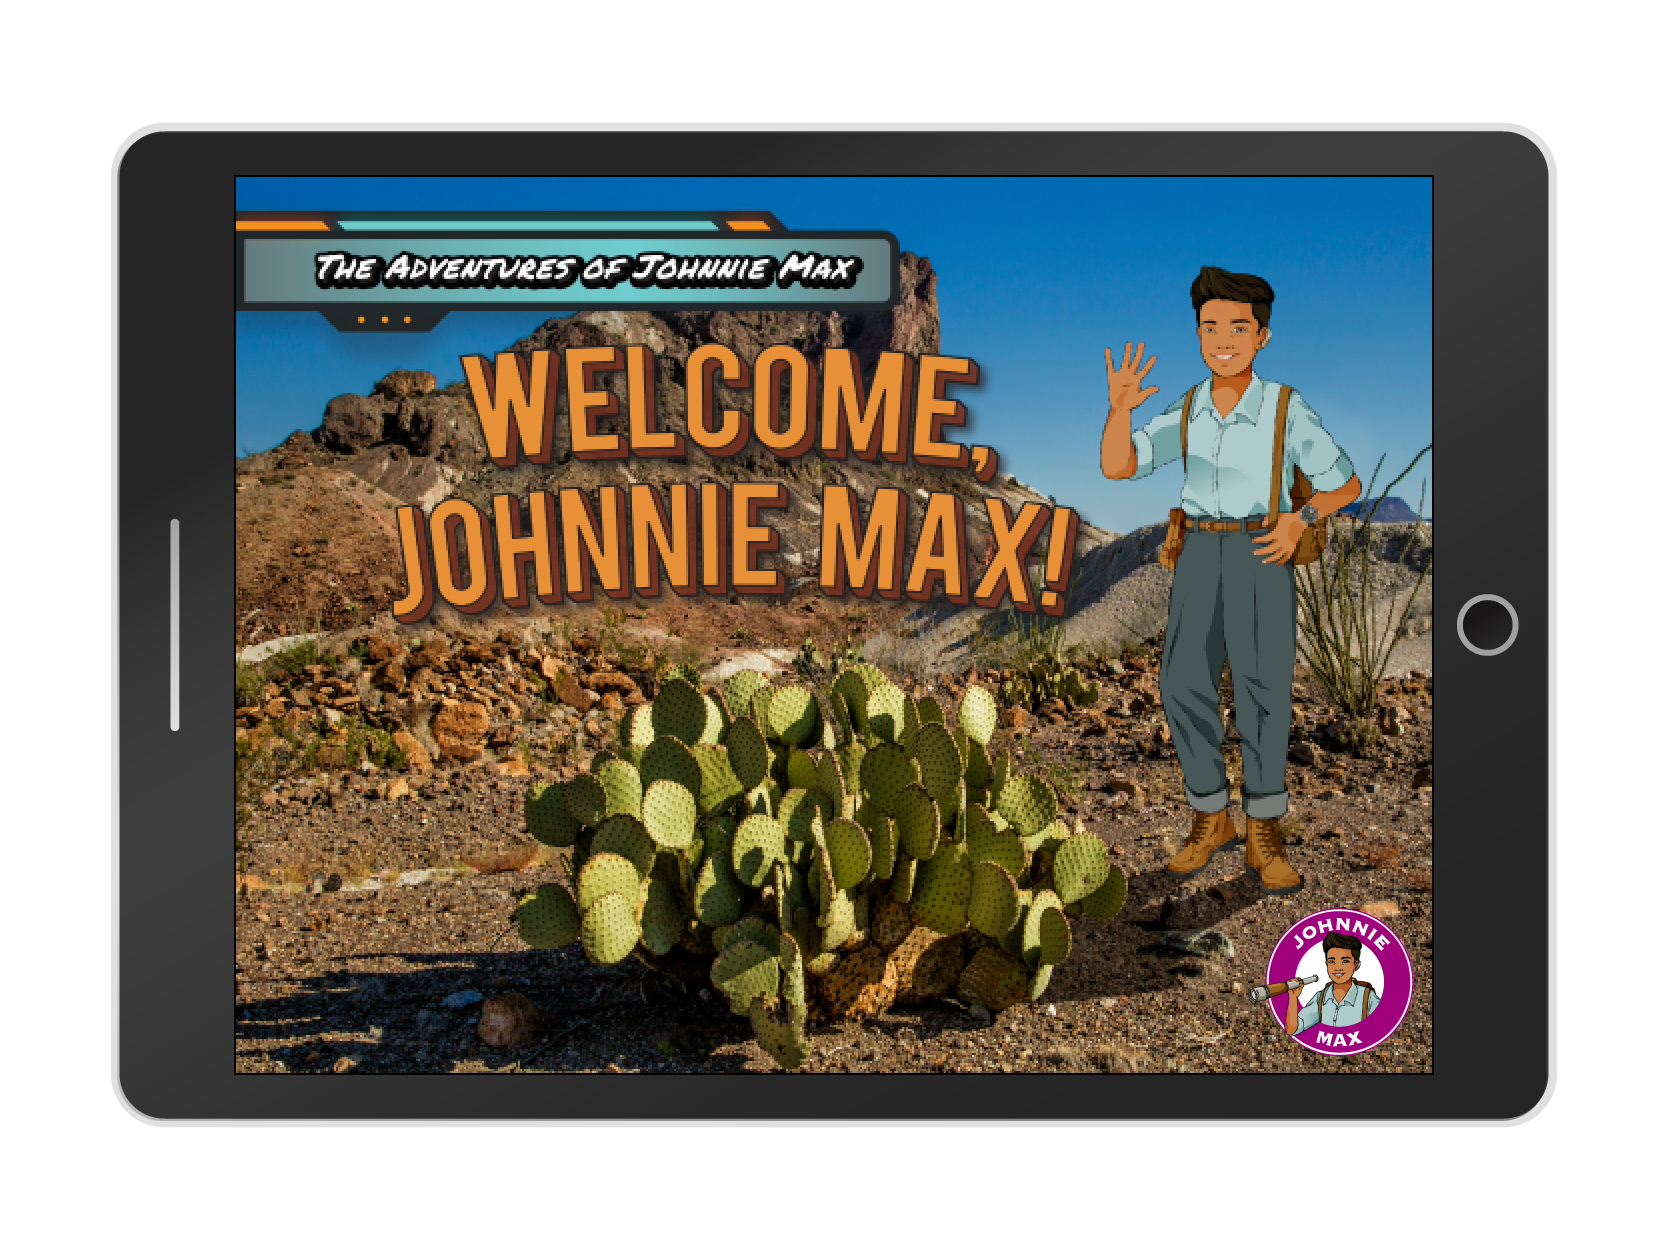 The Adventures of Johnnie Max